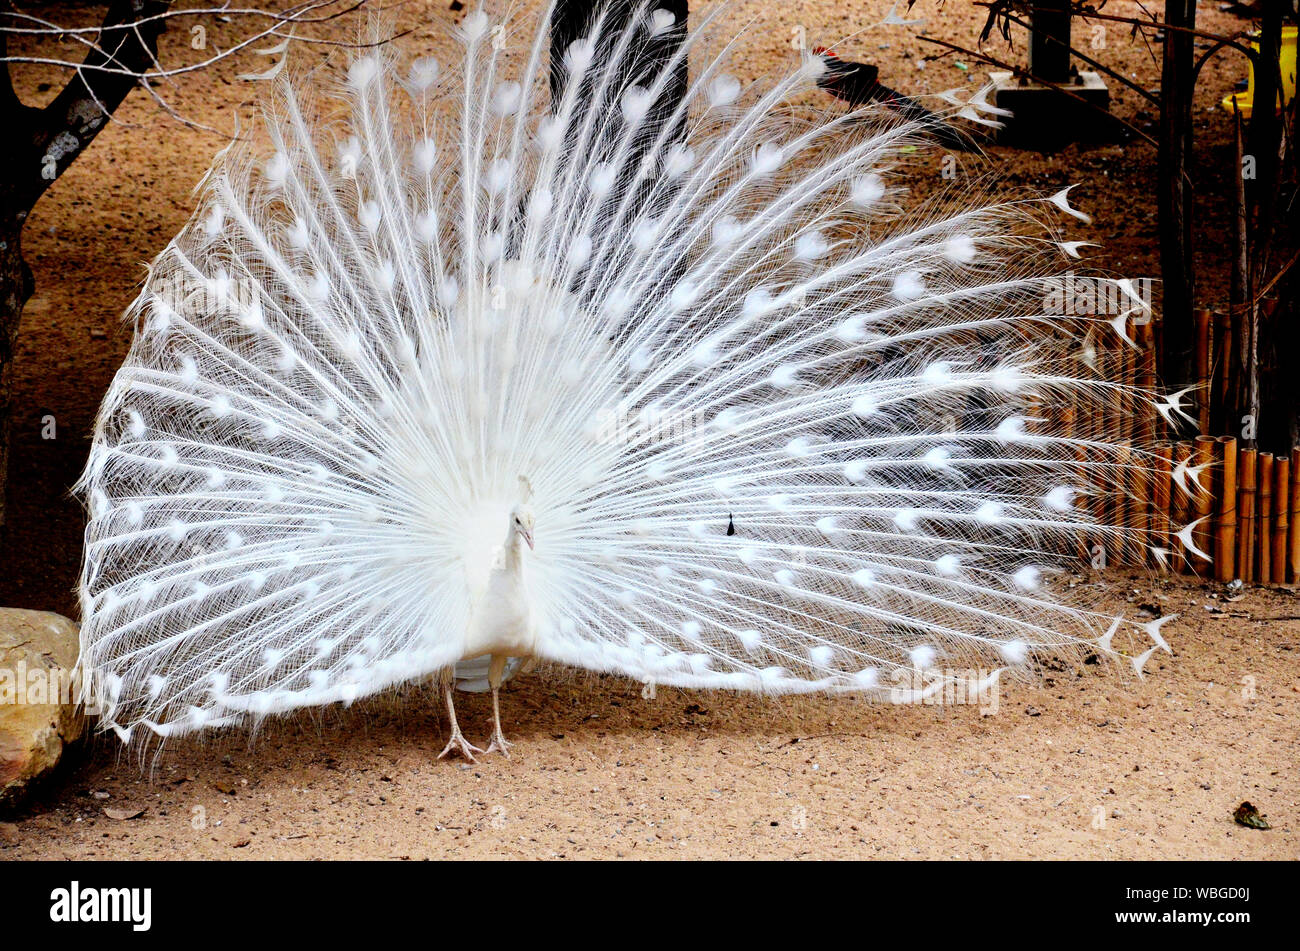 Beautiful White Peacock With Fanned Out Feathers Stock Photo - Alamy